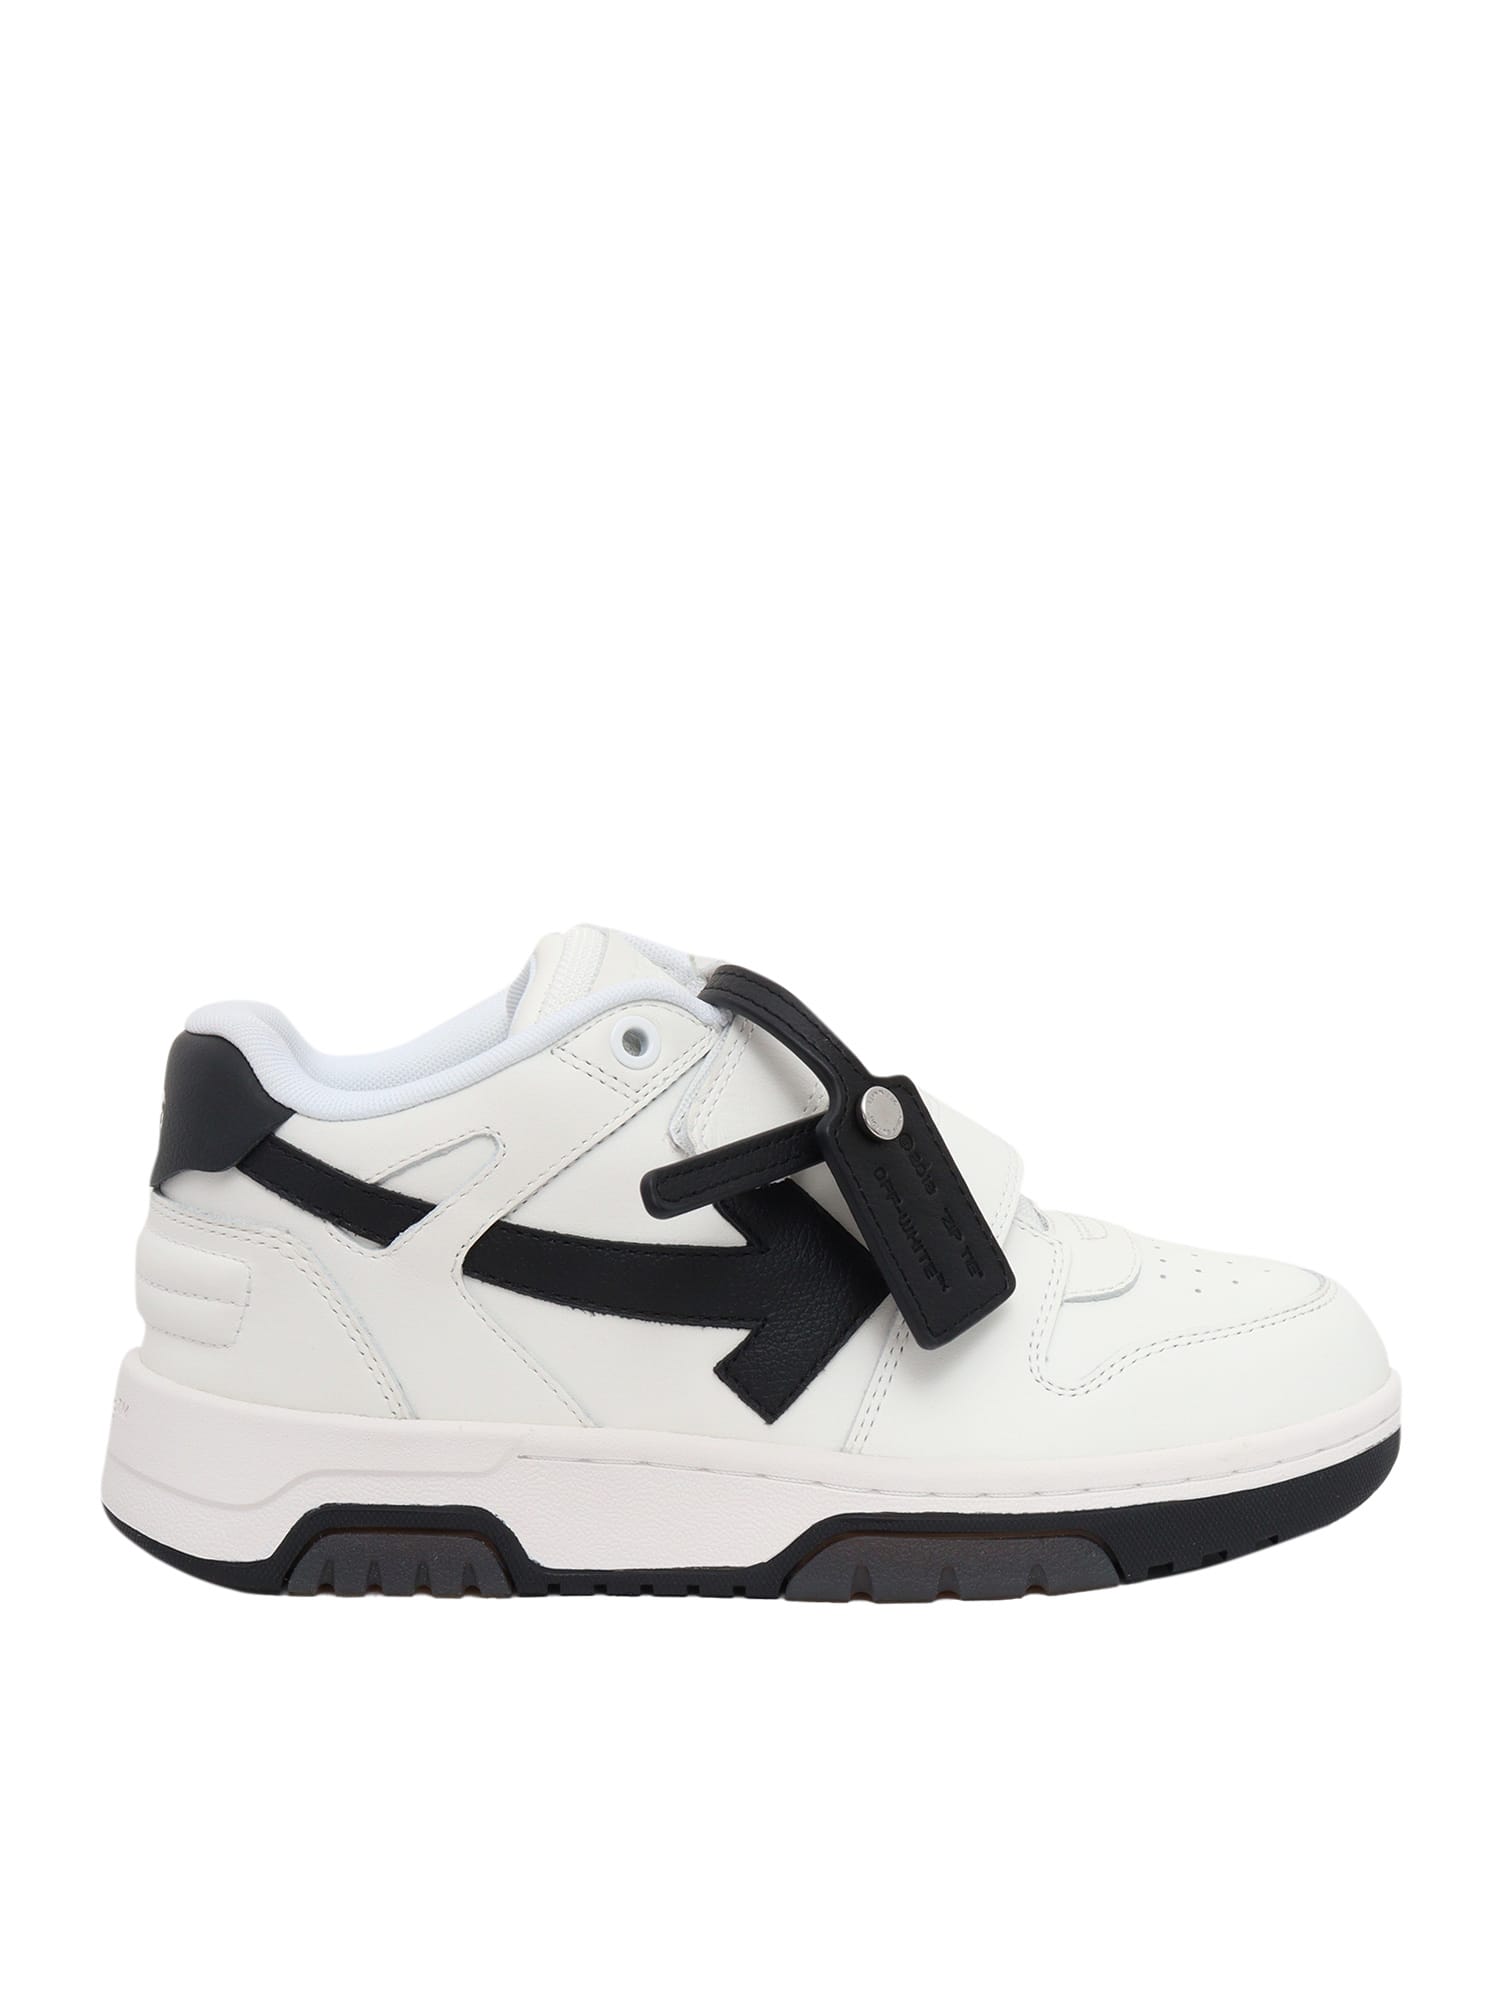 OFF-WHITE OUT OF OFFICE SNEAKERS